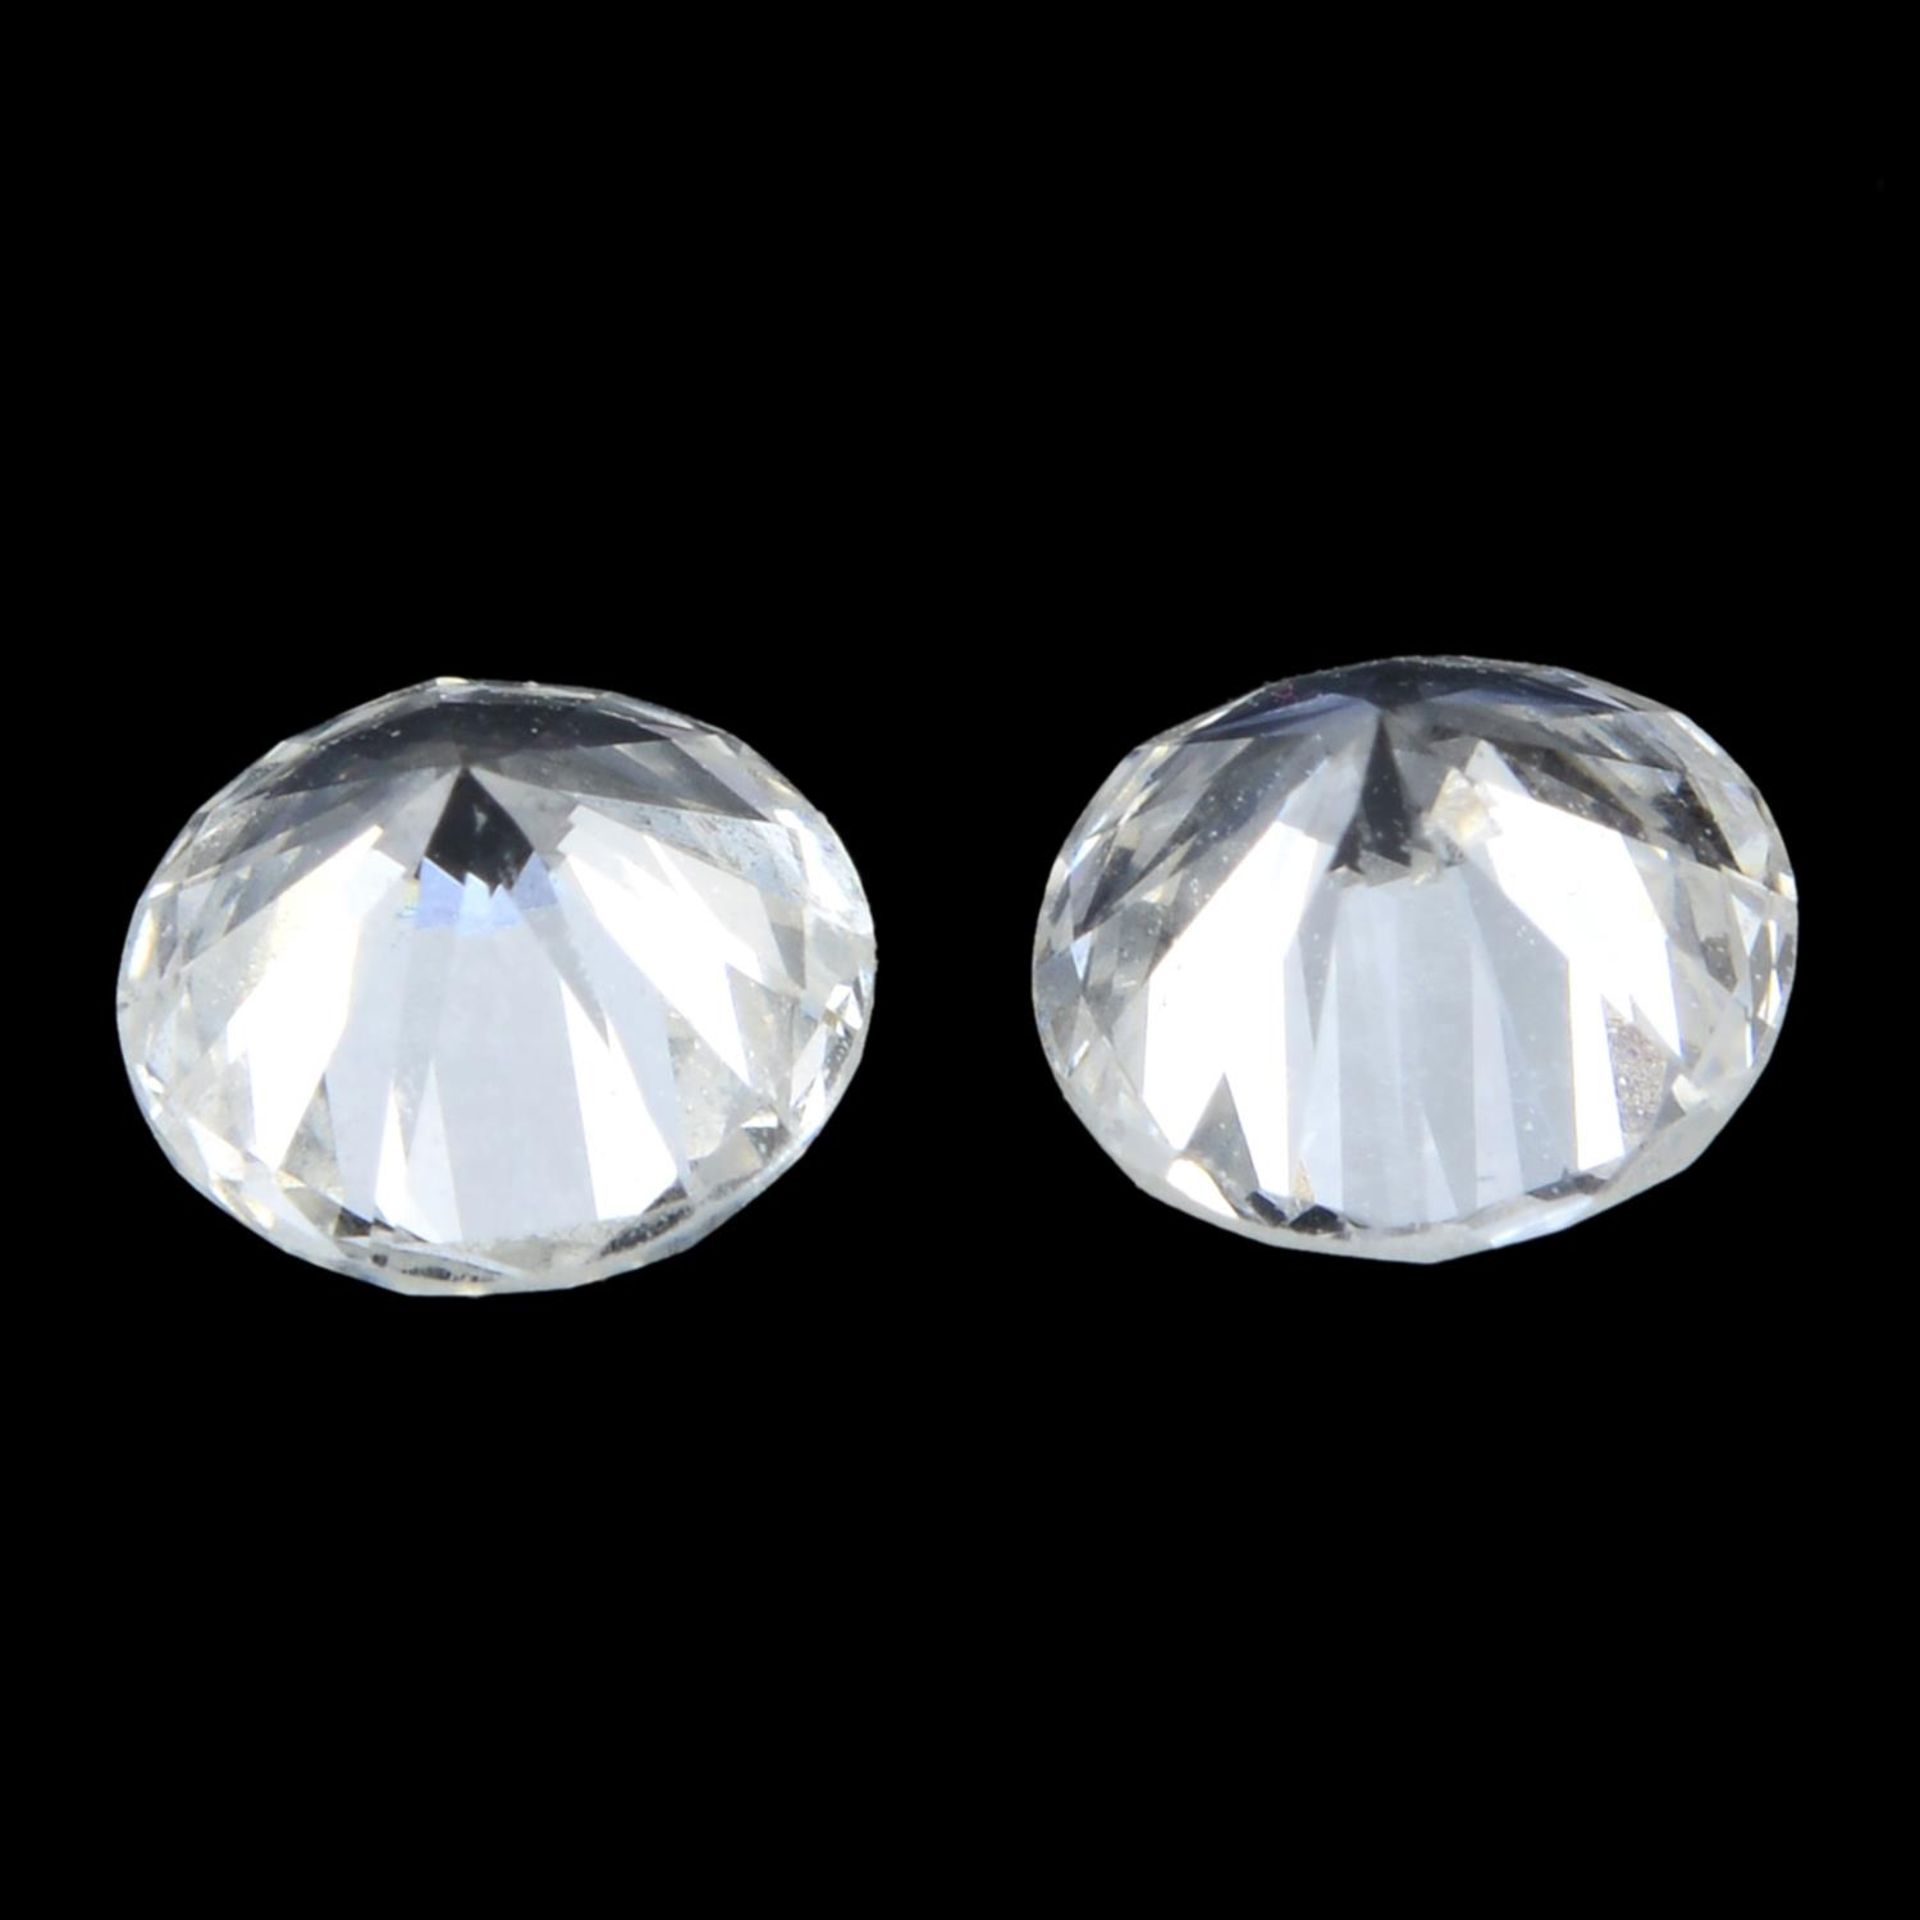 Pair of brilliant cut diamonds weighing 0.56ct - Image 2 of 2